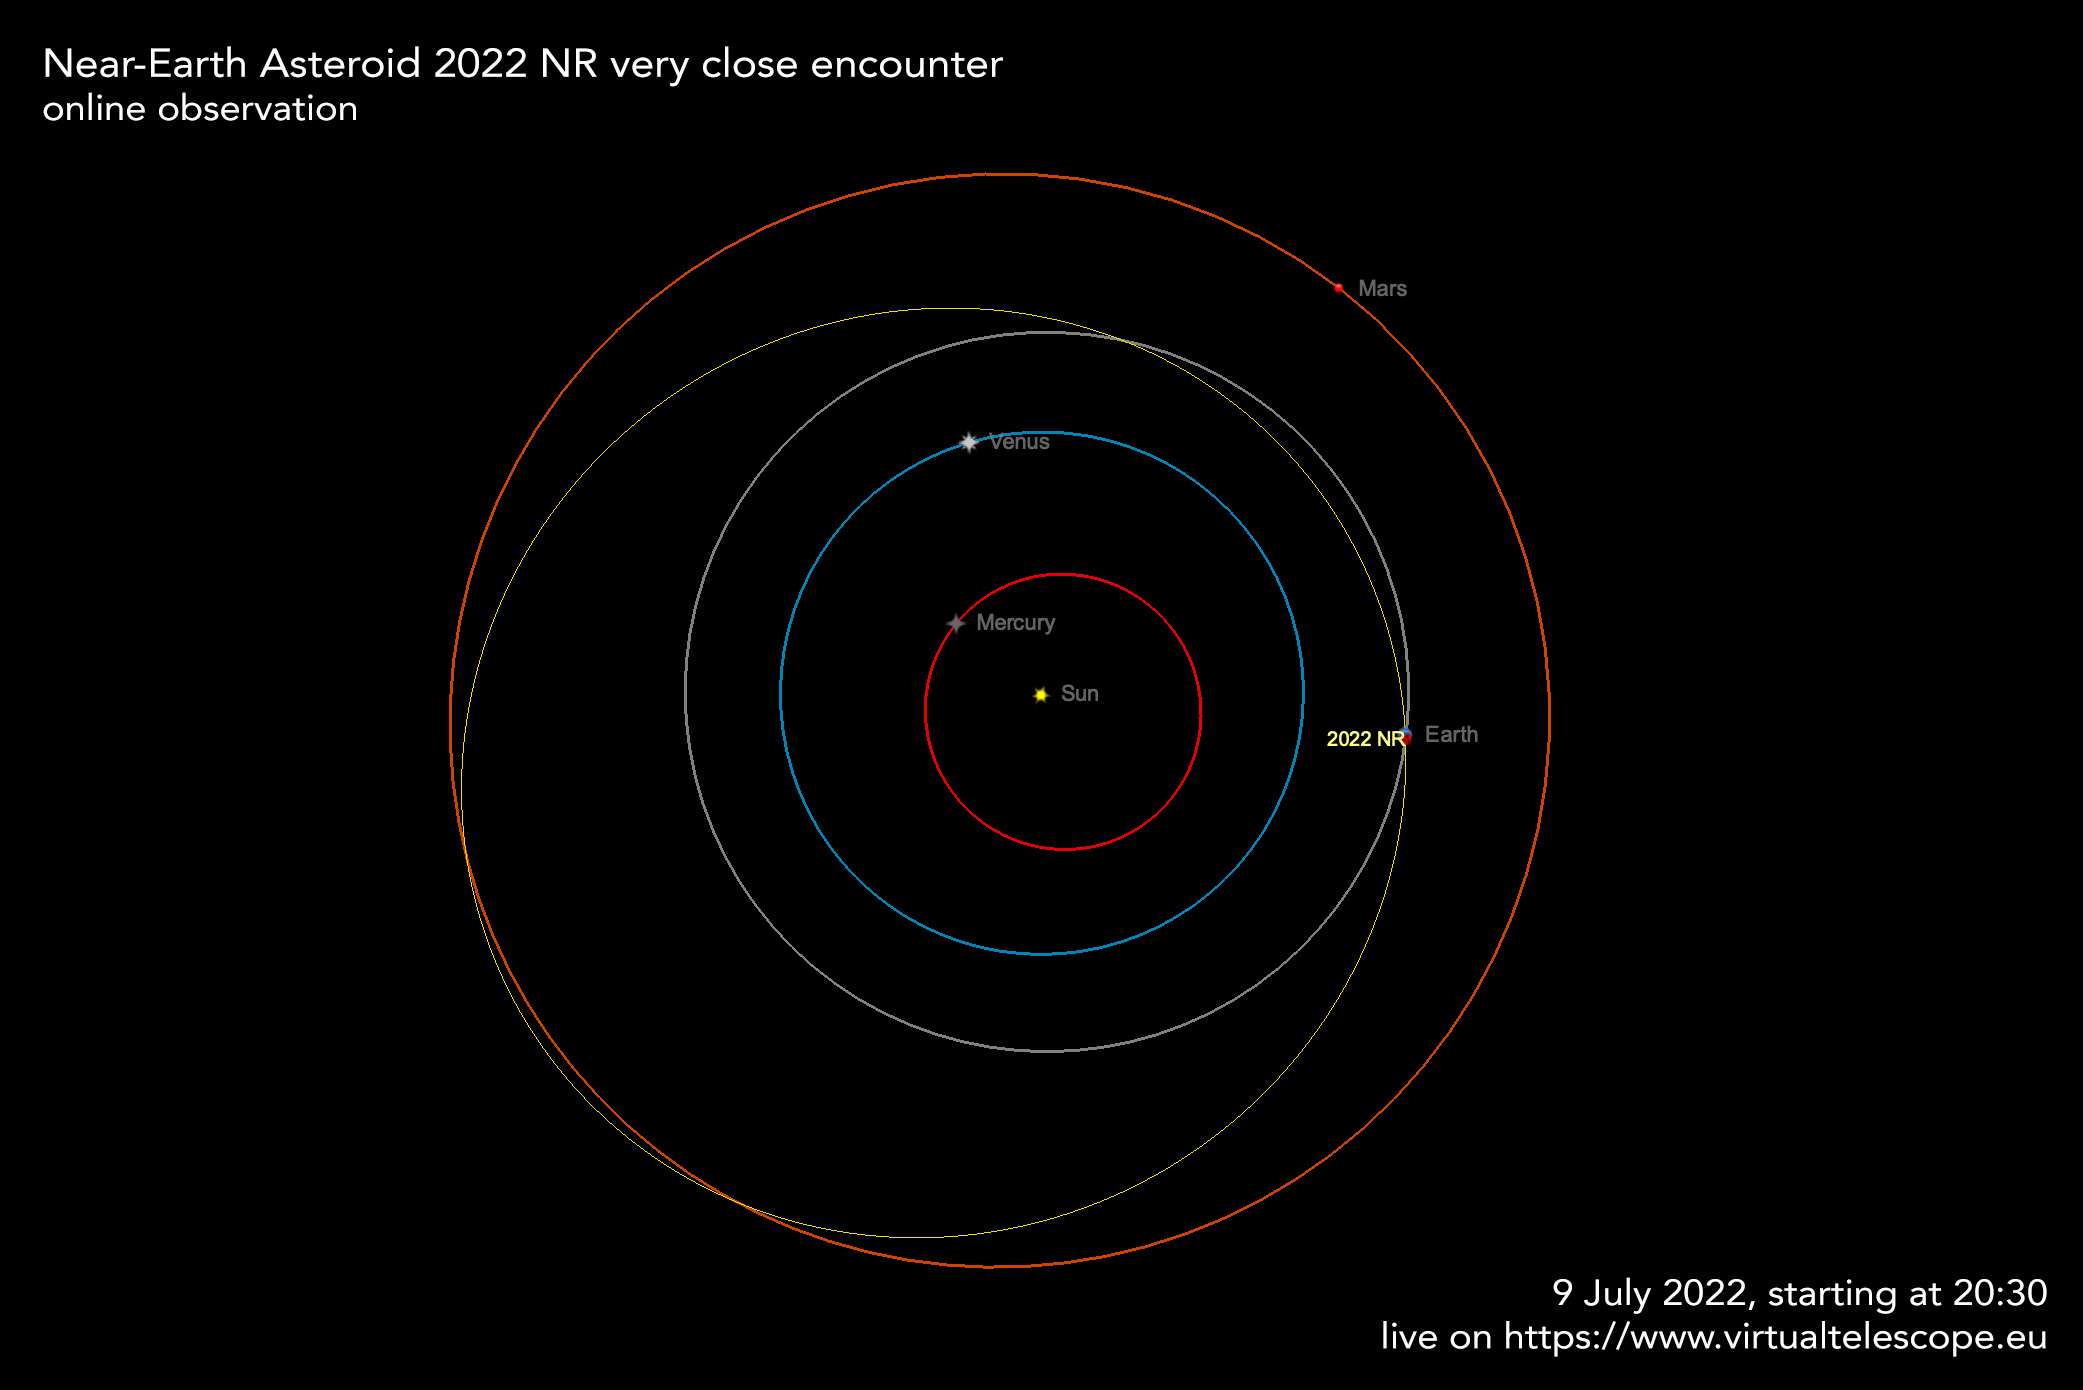 Near-Earth asteroid 2022 NR: poster of the event.